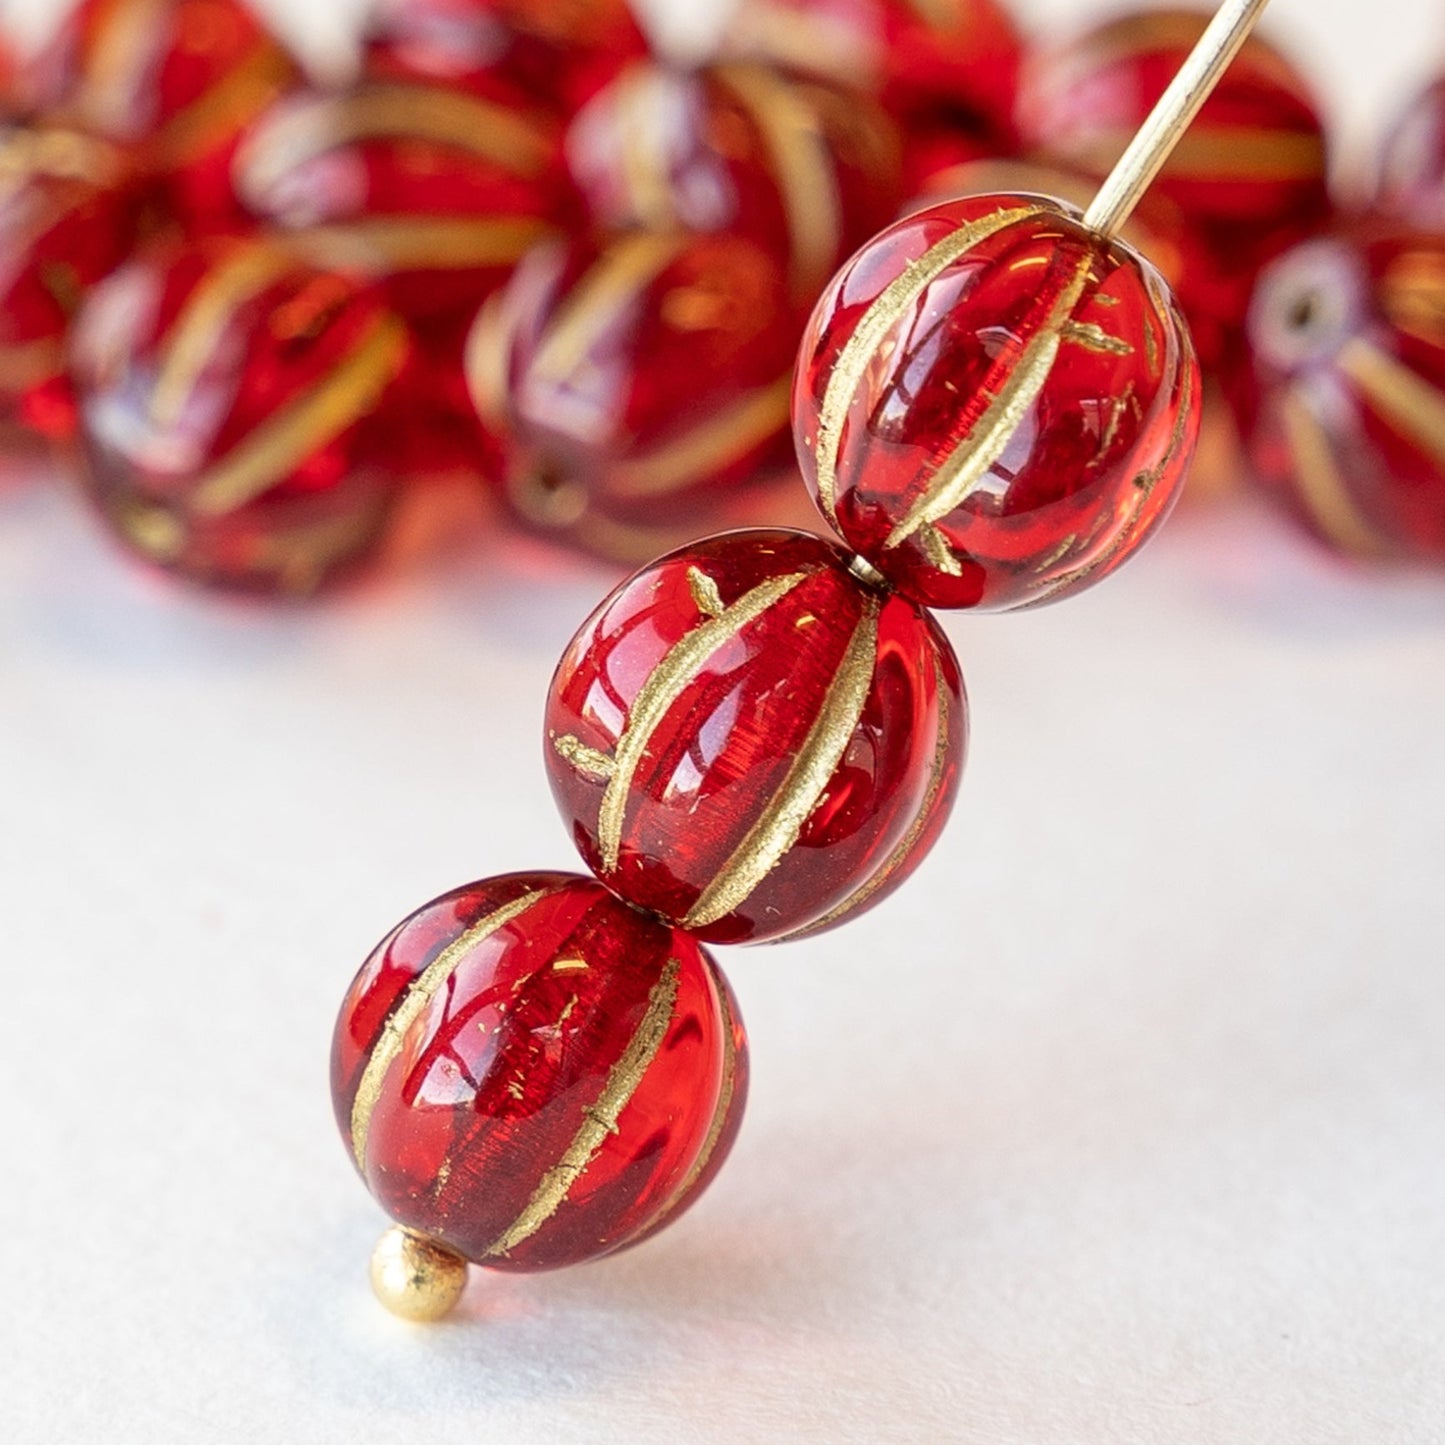 10mm Melon Beads - Ruby Red with Gold Wash - 15 Beads